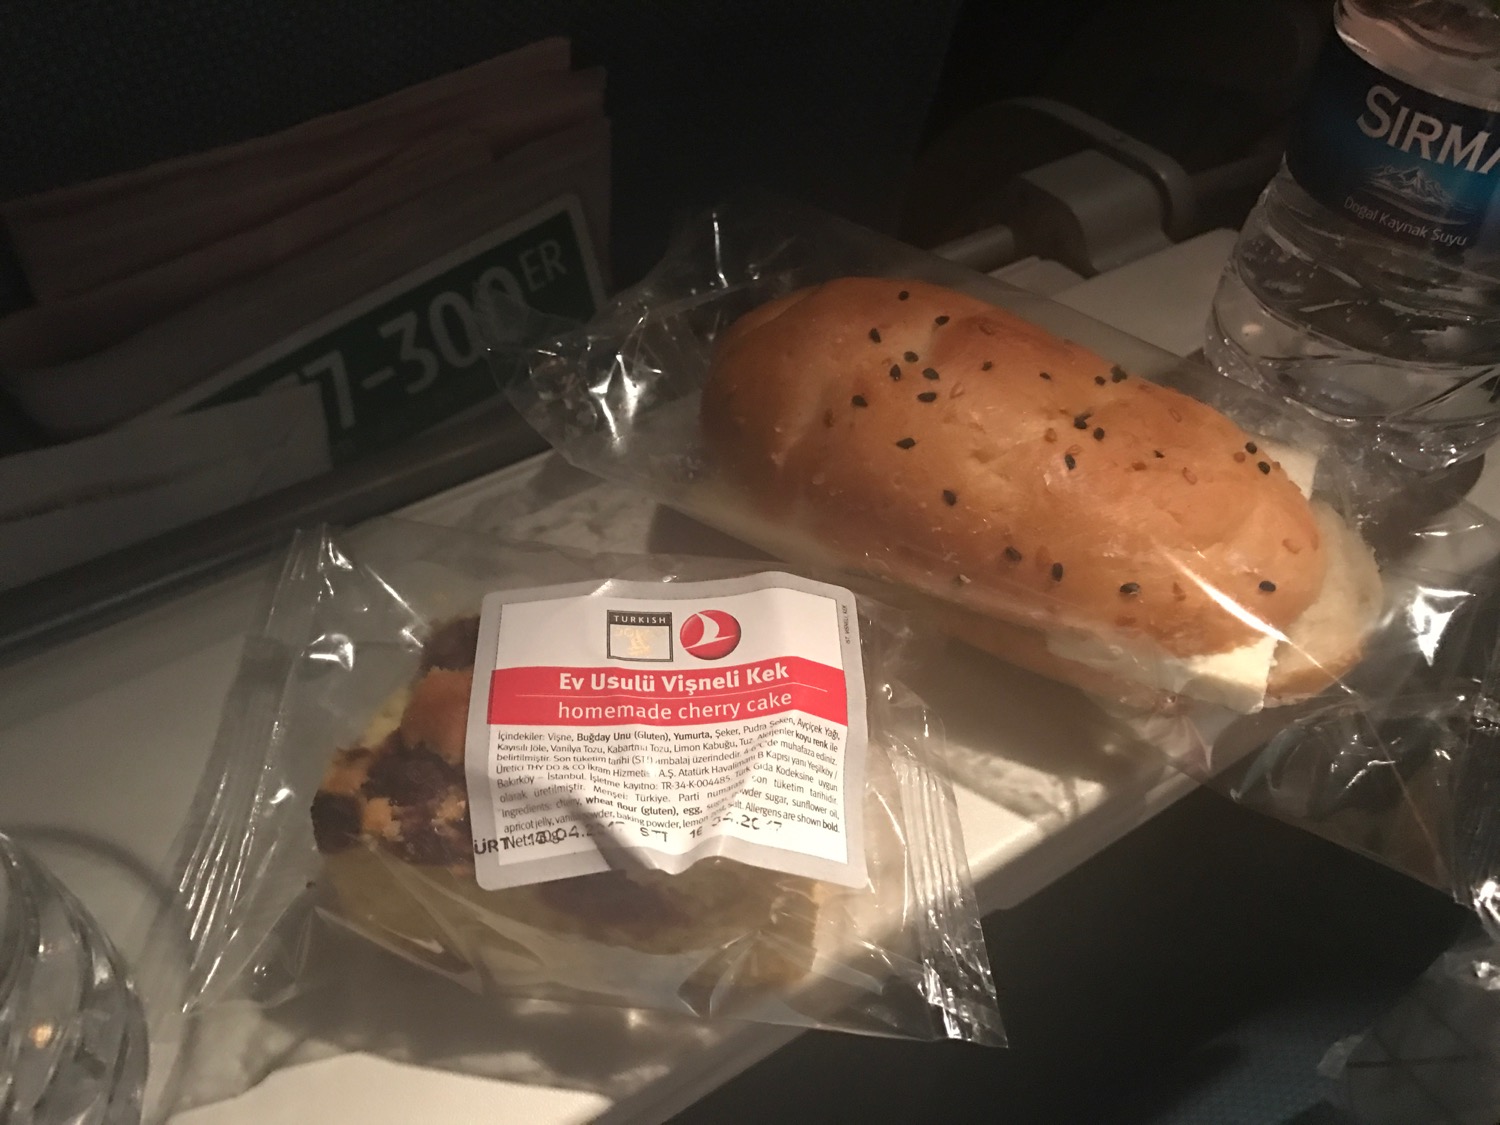 Turkish Airlines Economy Class Review 777-300 - 55